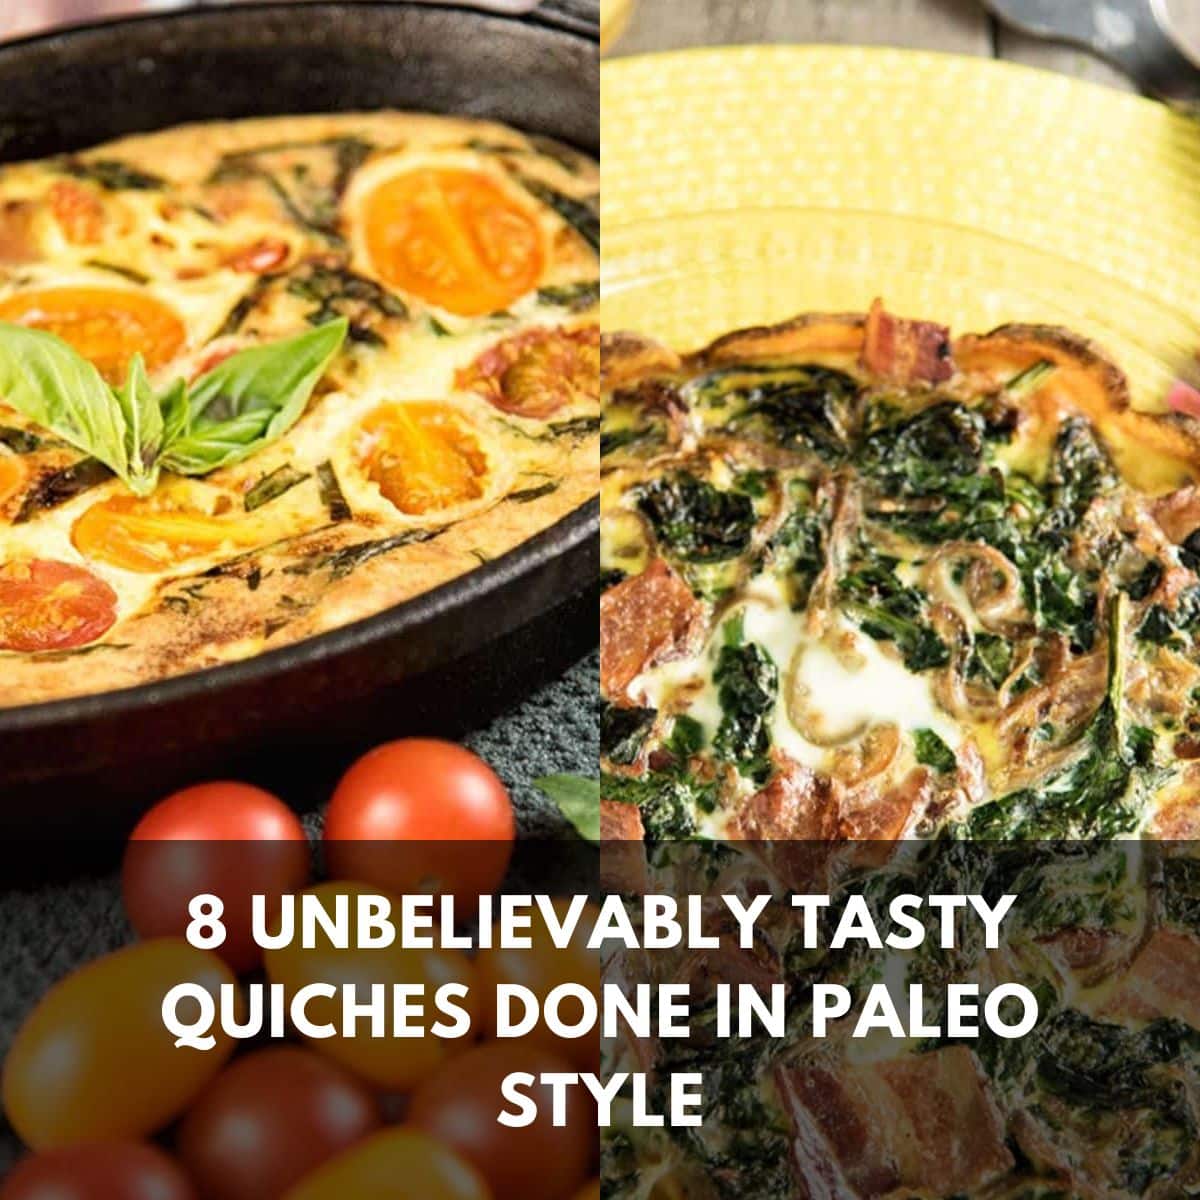 8 unbelievably tasty quiches done in paleo style main